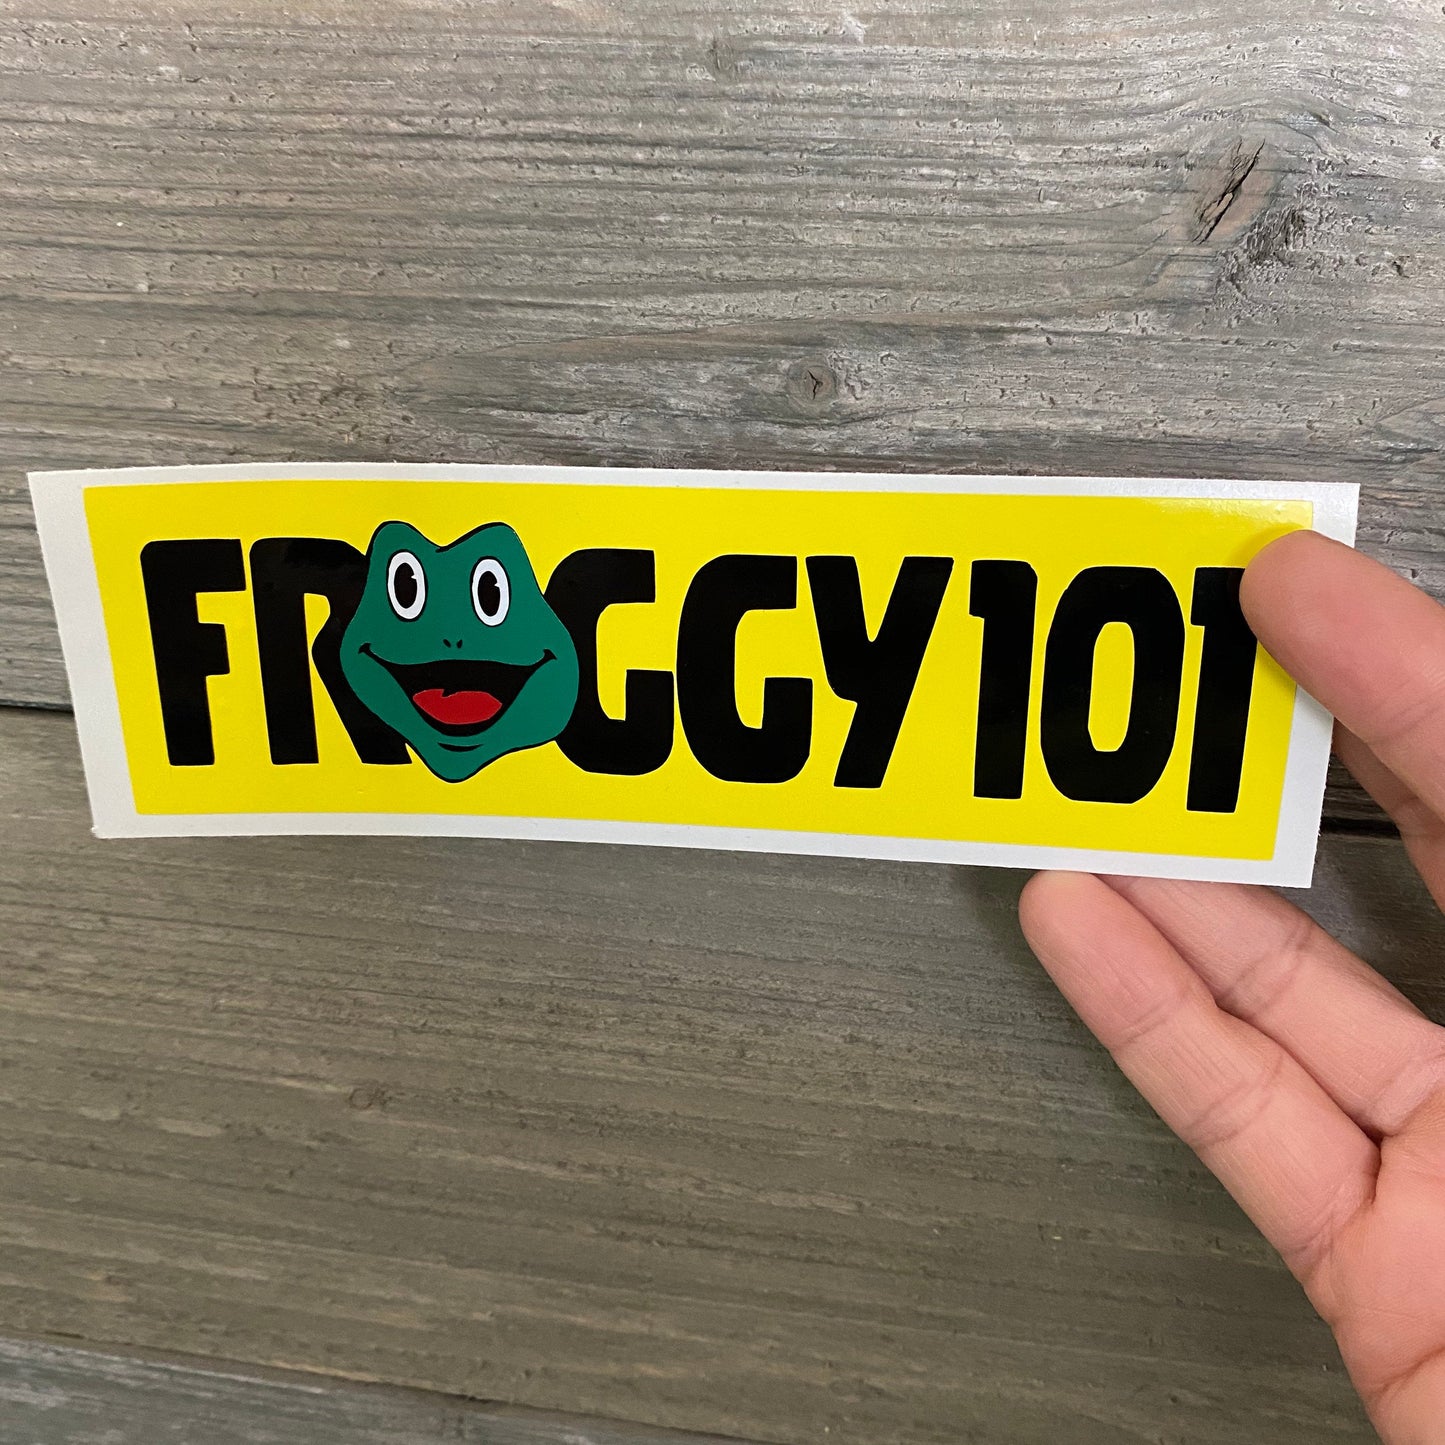 The Office's Froggy 101 Permanent Vinyl Decal